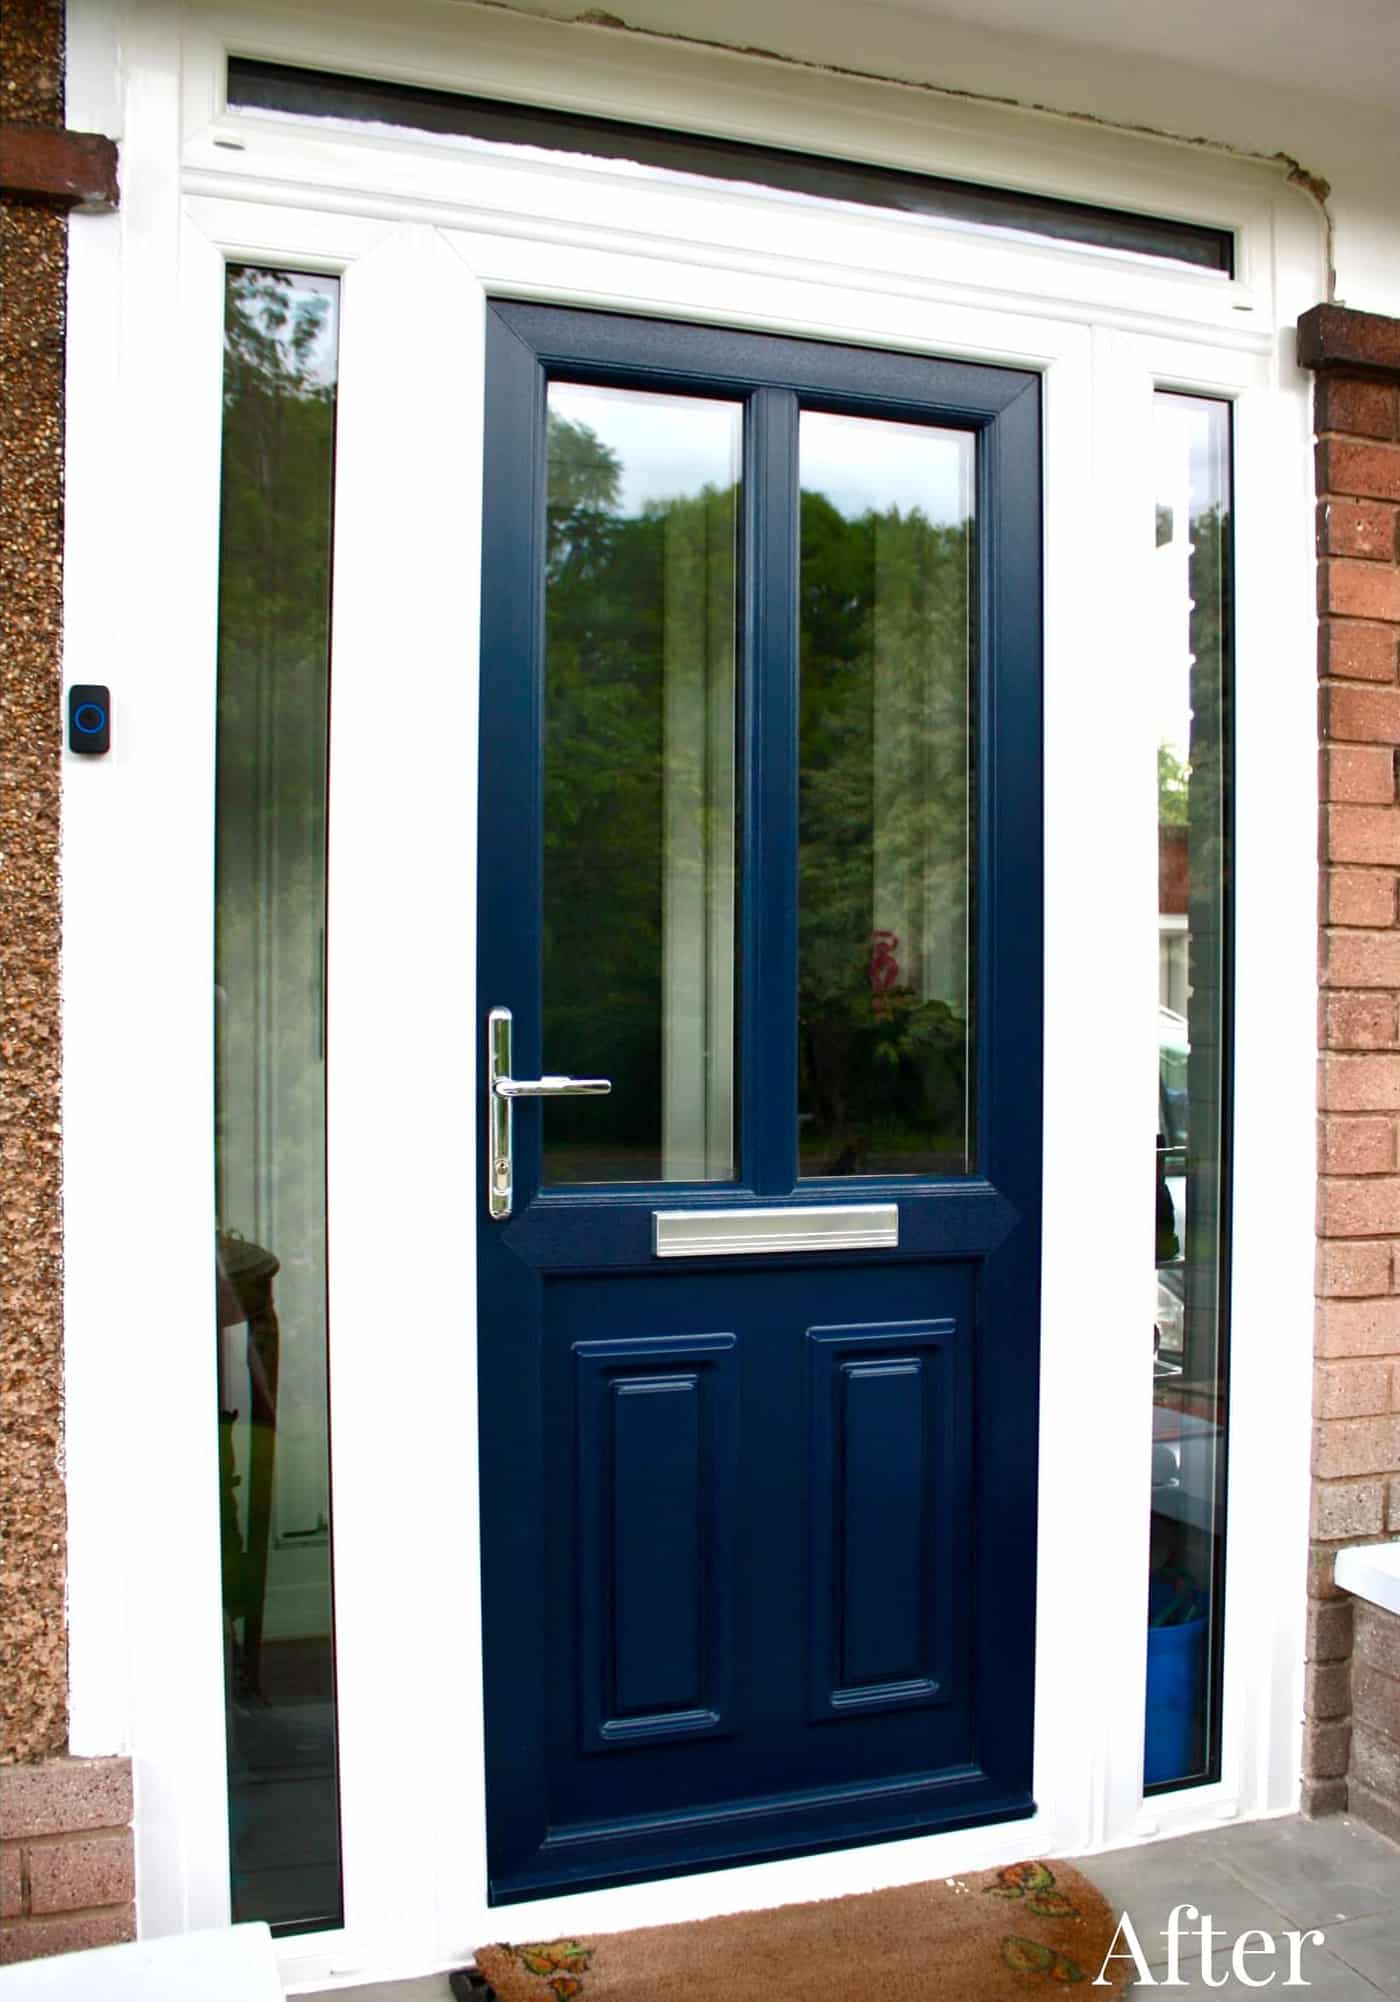 doors after | The Advanced Group Windows